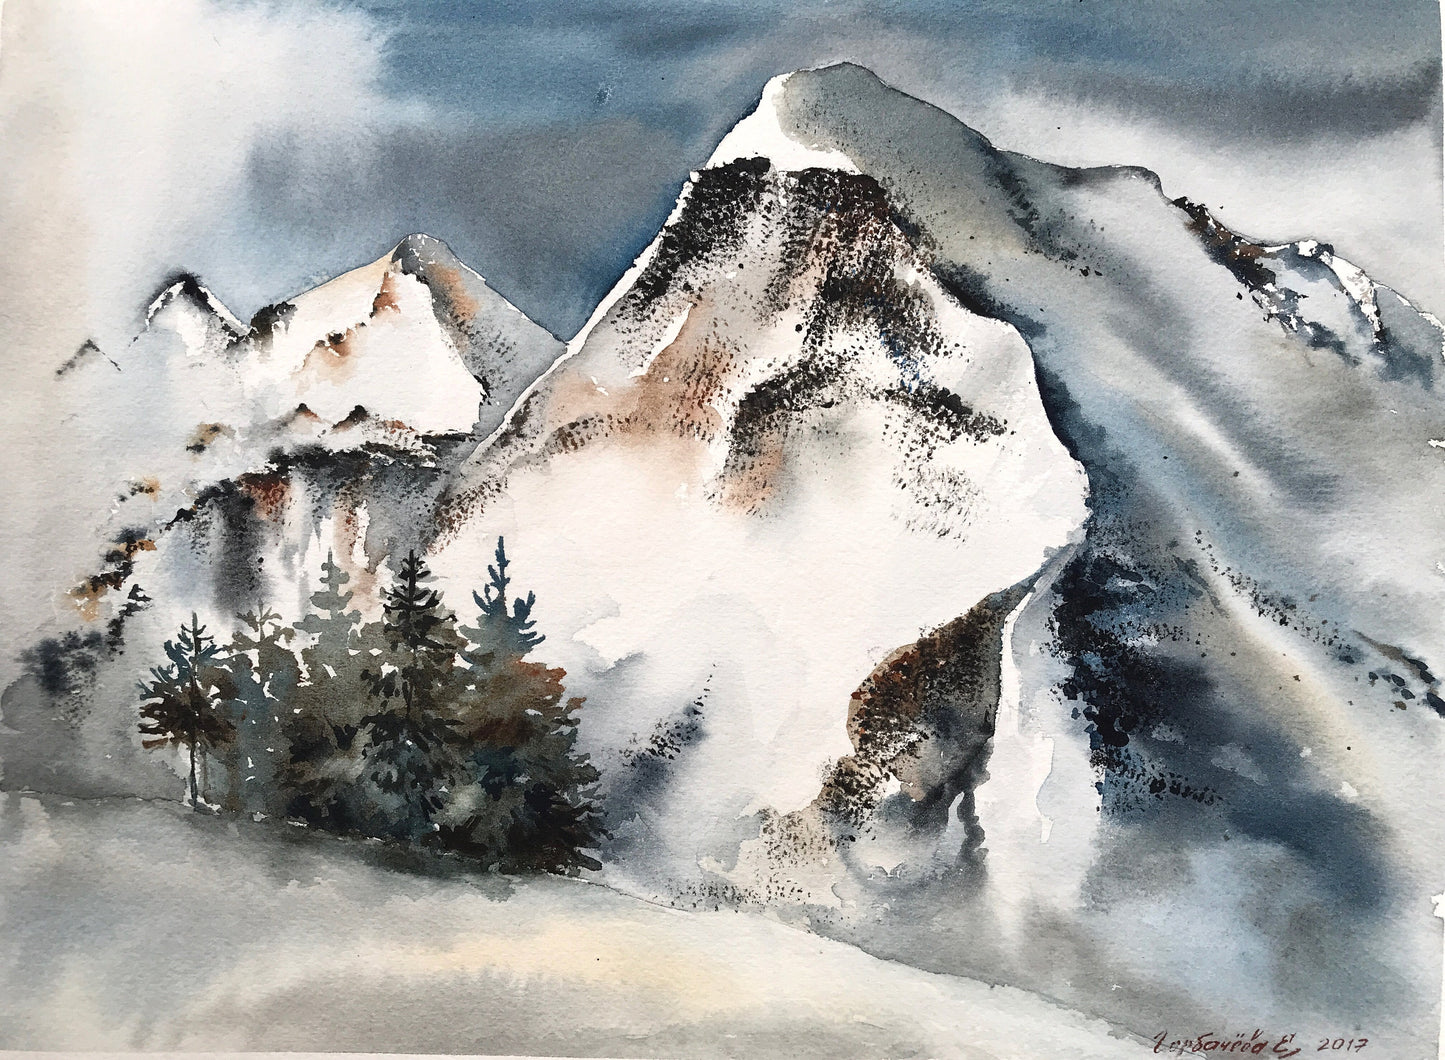 Snowy Mountains Painting Watercolor Original, Nature Art, Mountain Forest Wall Decor, Landscape, Gift